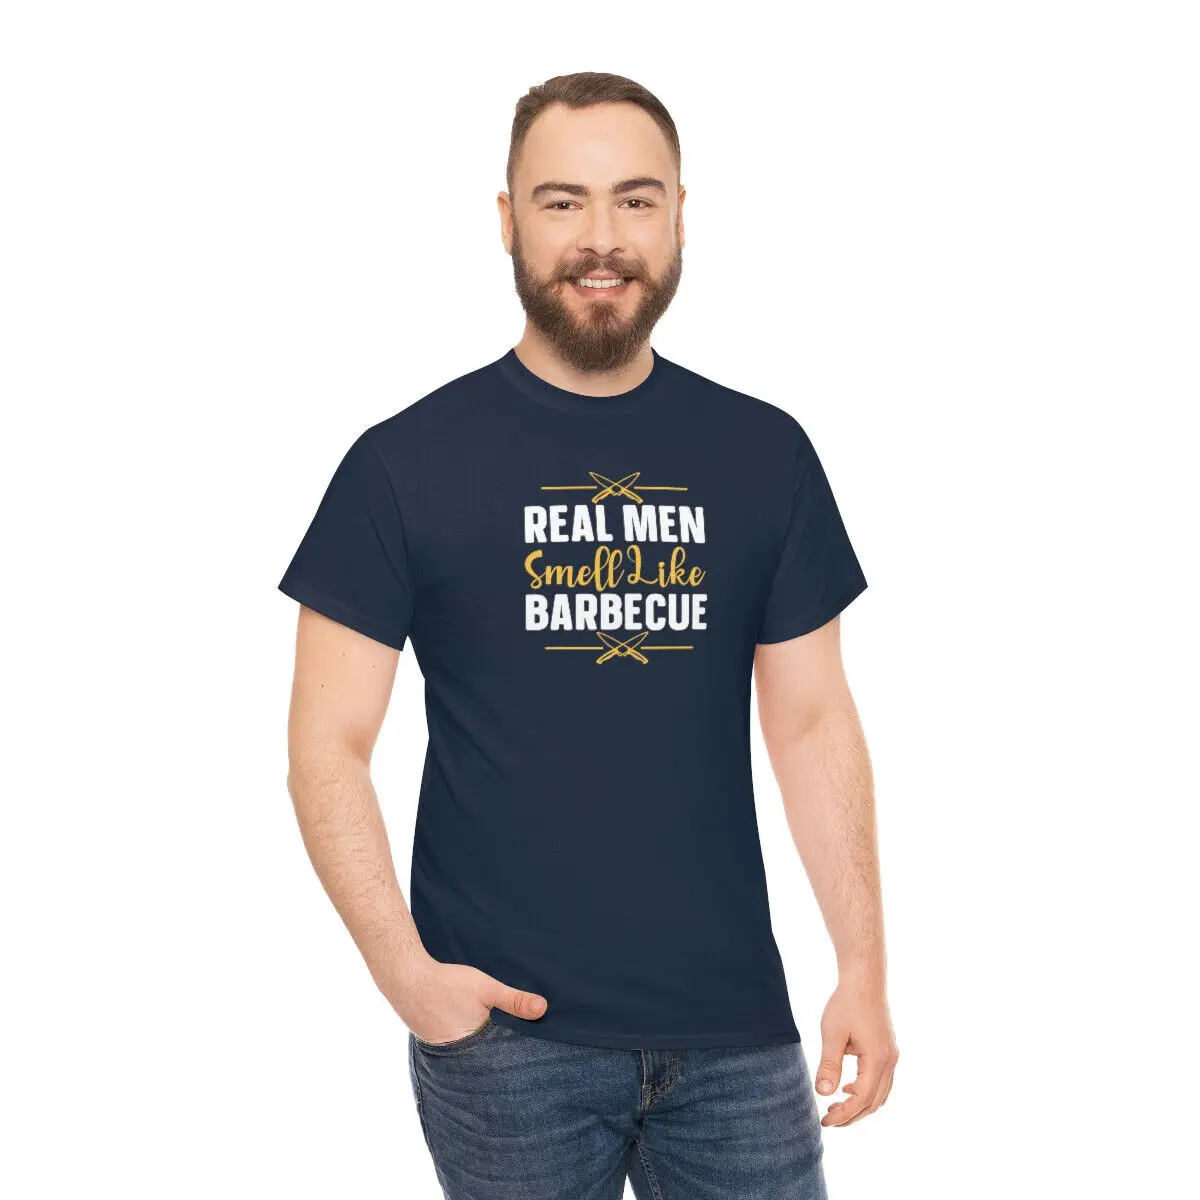 

Real Men Smell Like Barbecue T-shirt